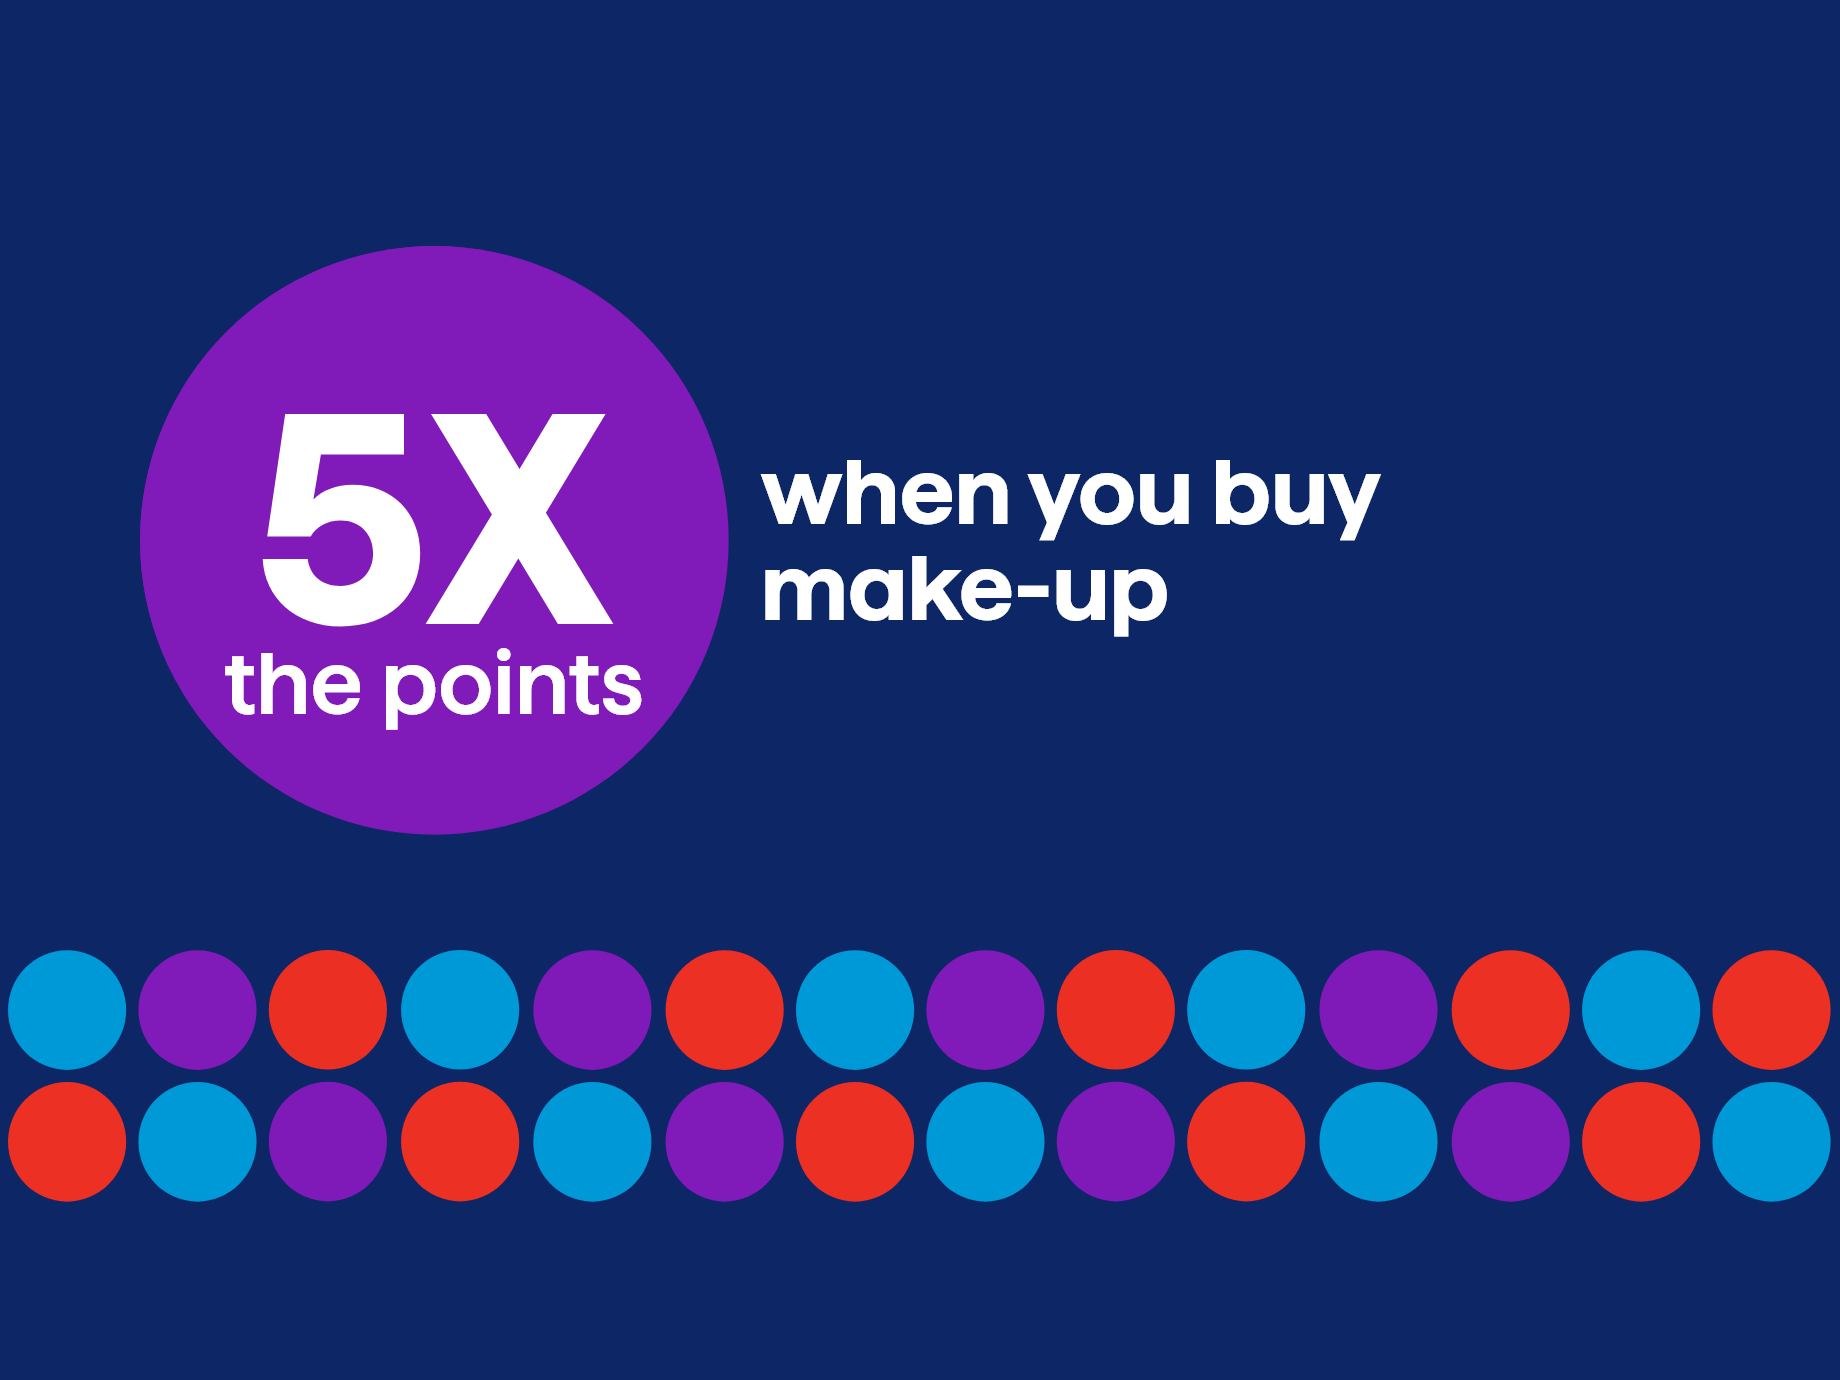 5x the points when you purchase make-up